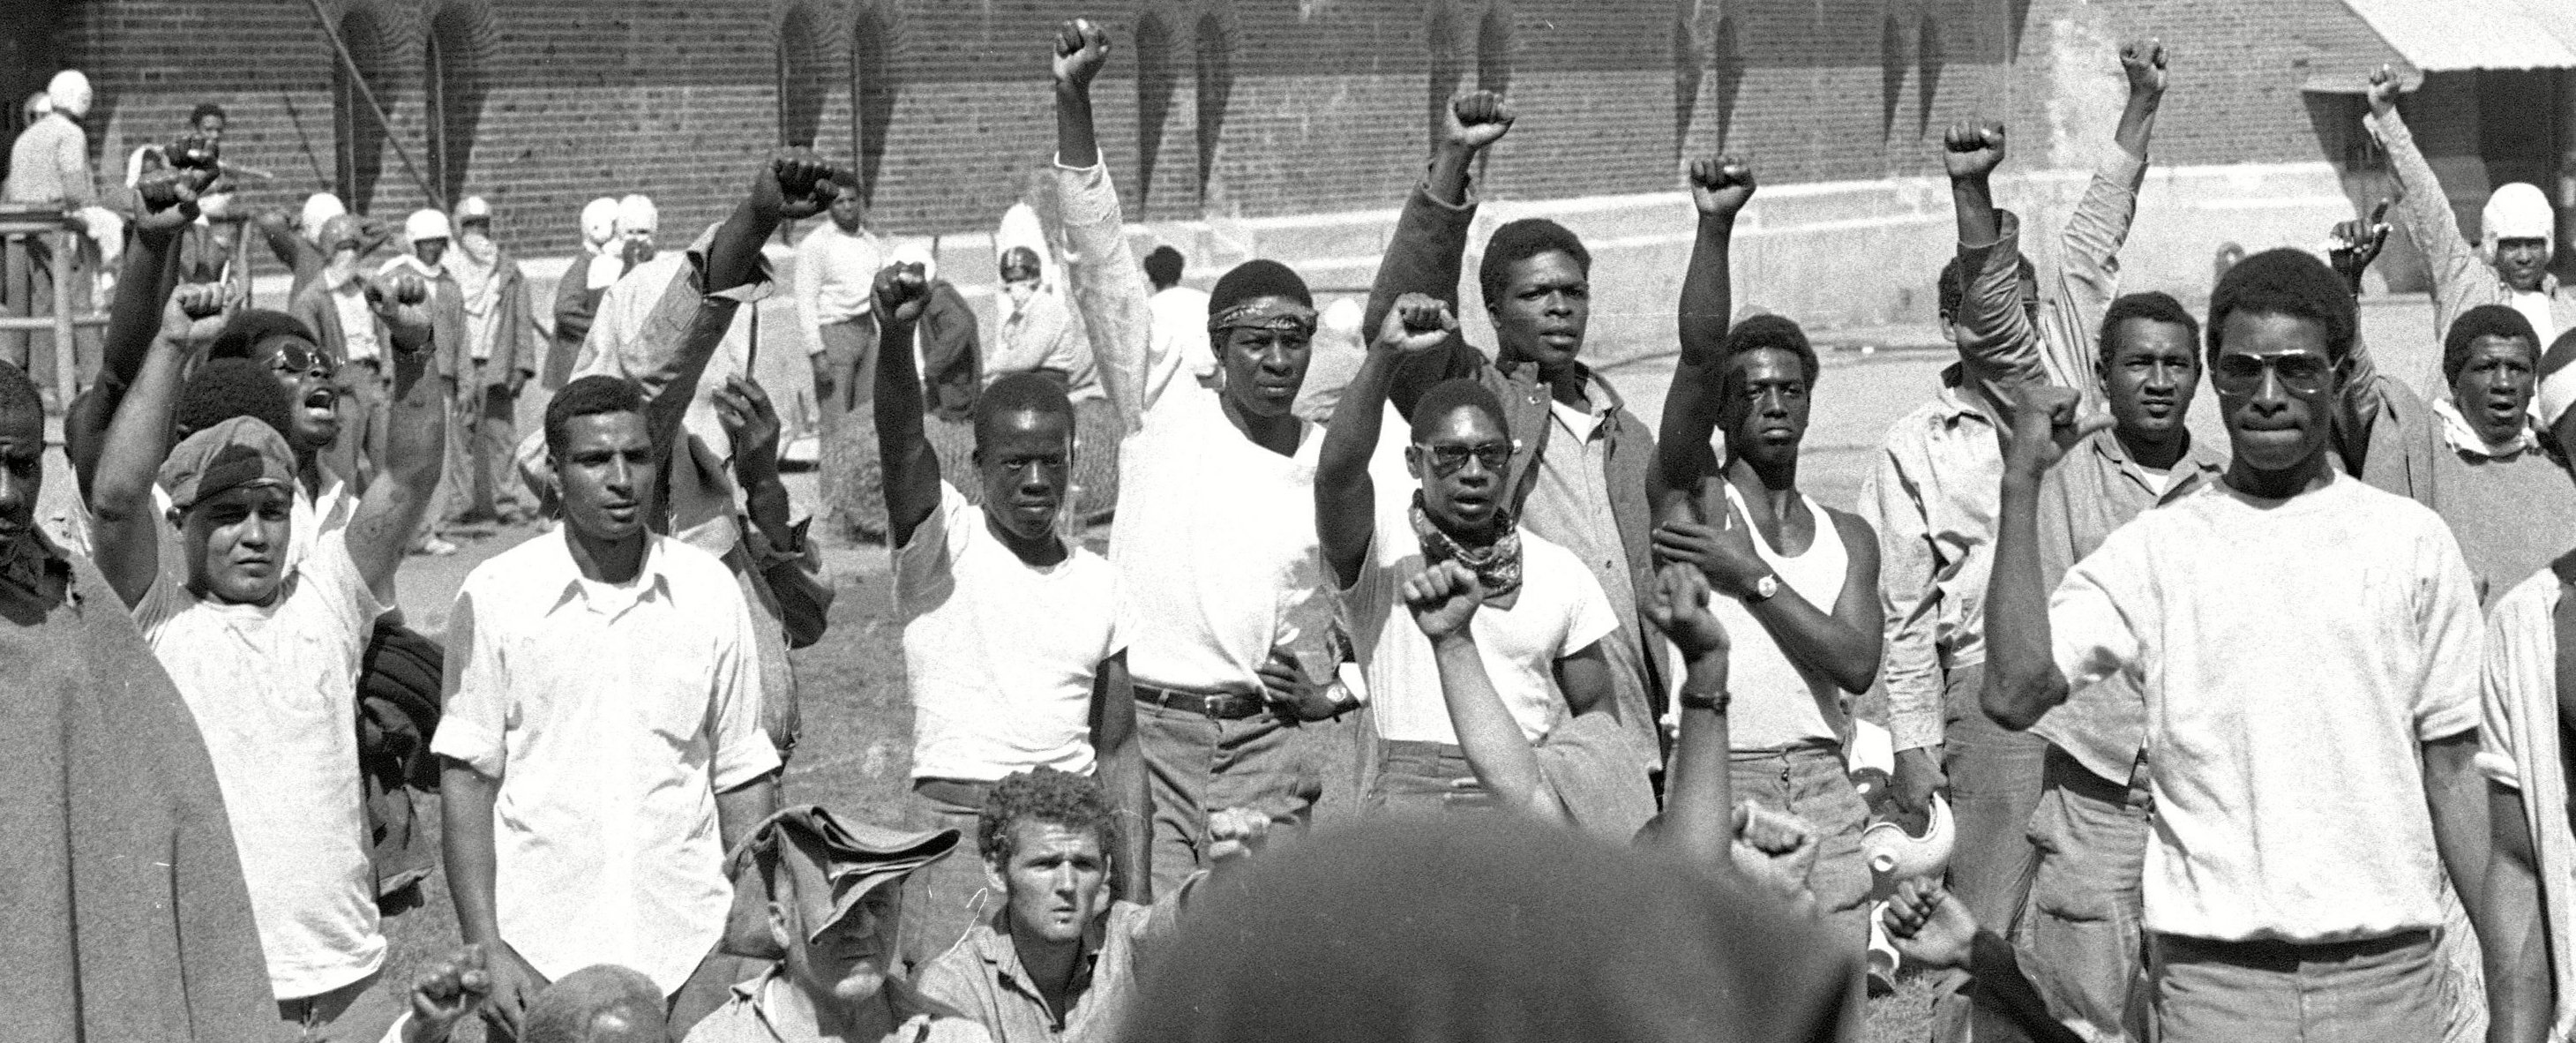 Prisoners raise their fists during the Attica uprising.